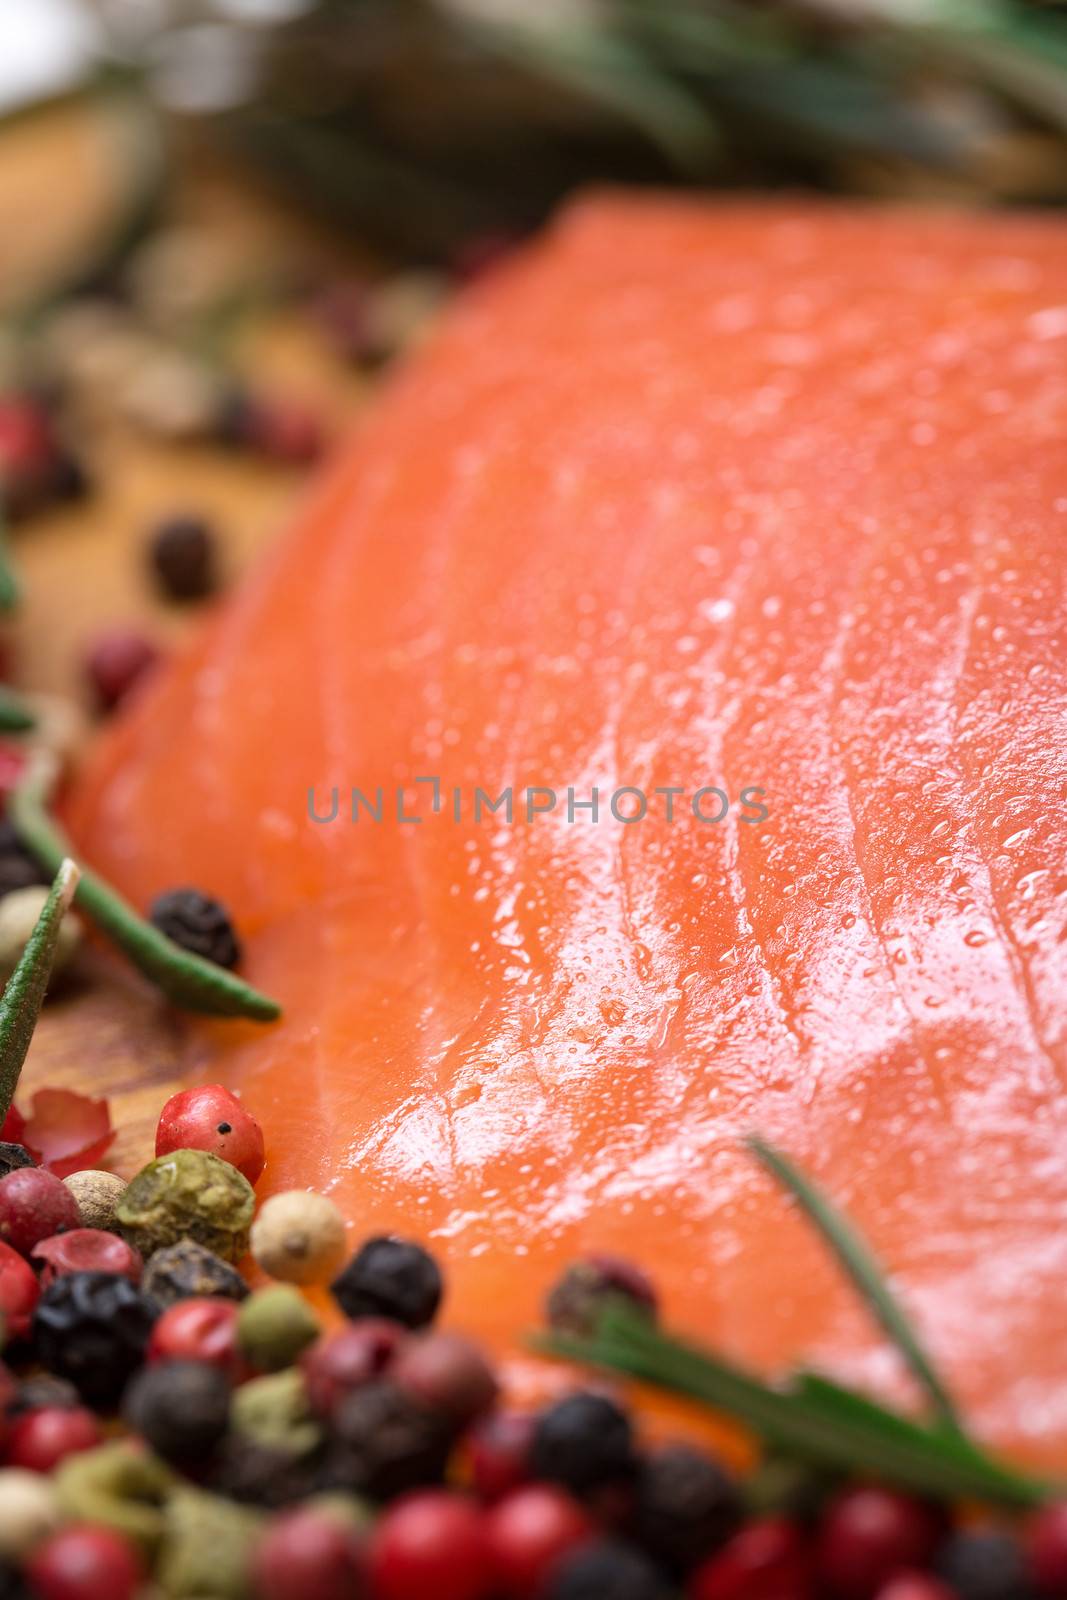 Piece fresh salmon with spices, closeup on wooden background